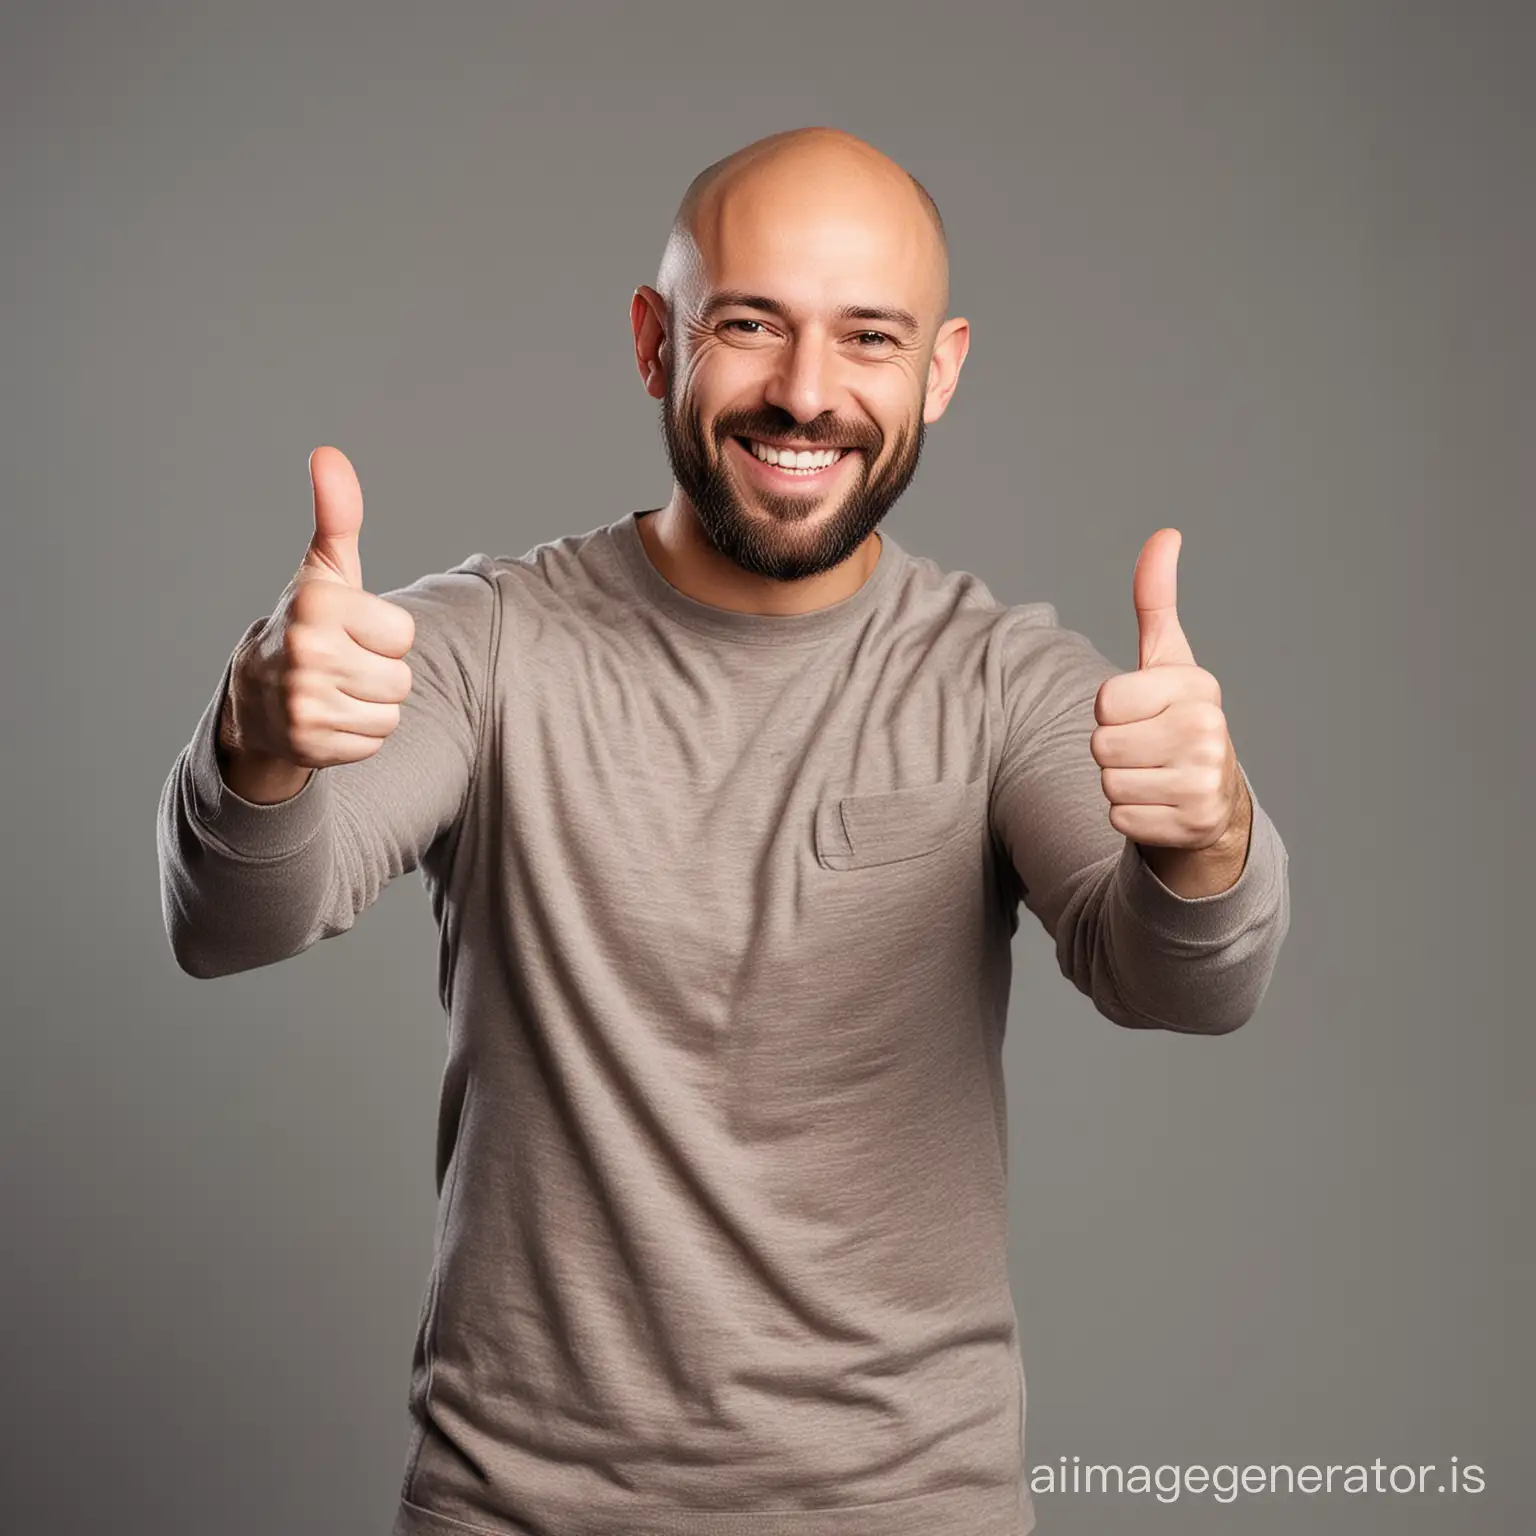 Smiling-Bald-Man-with-Short-Beard-Giving-Thumbs-Up-Gesture